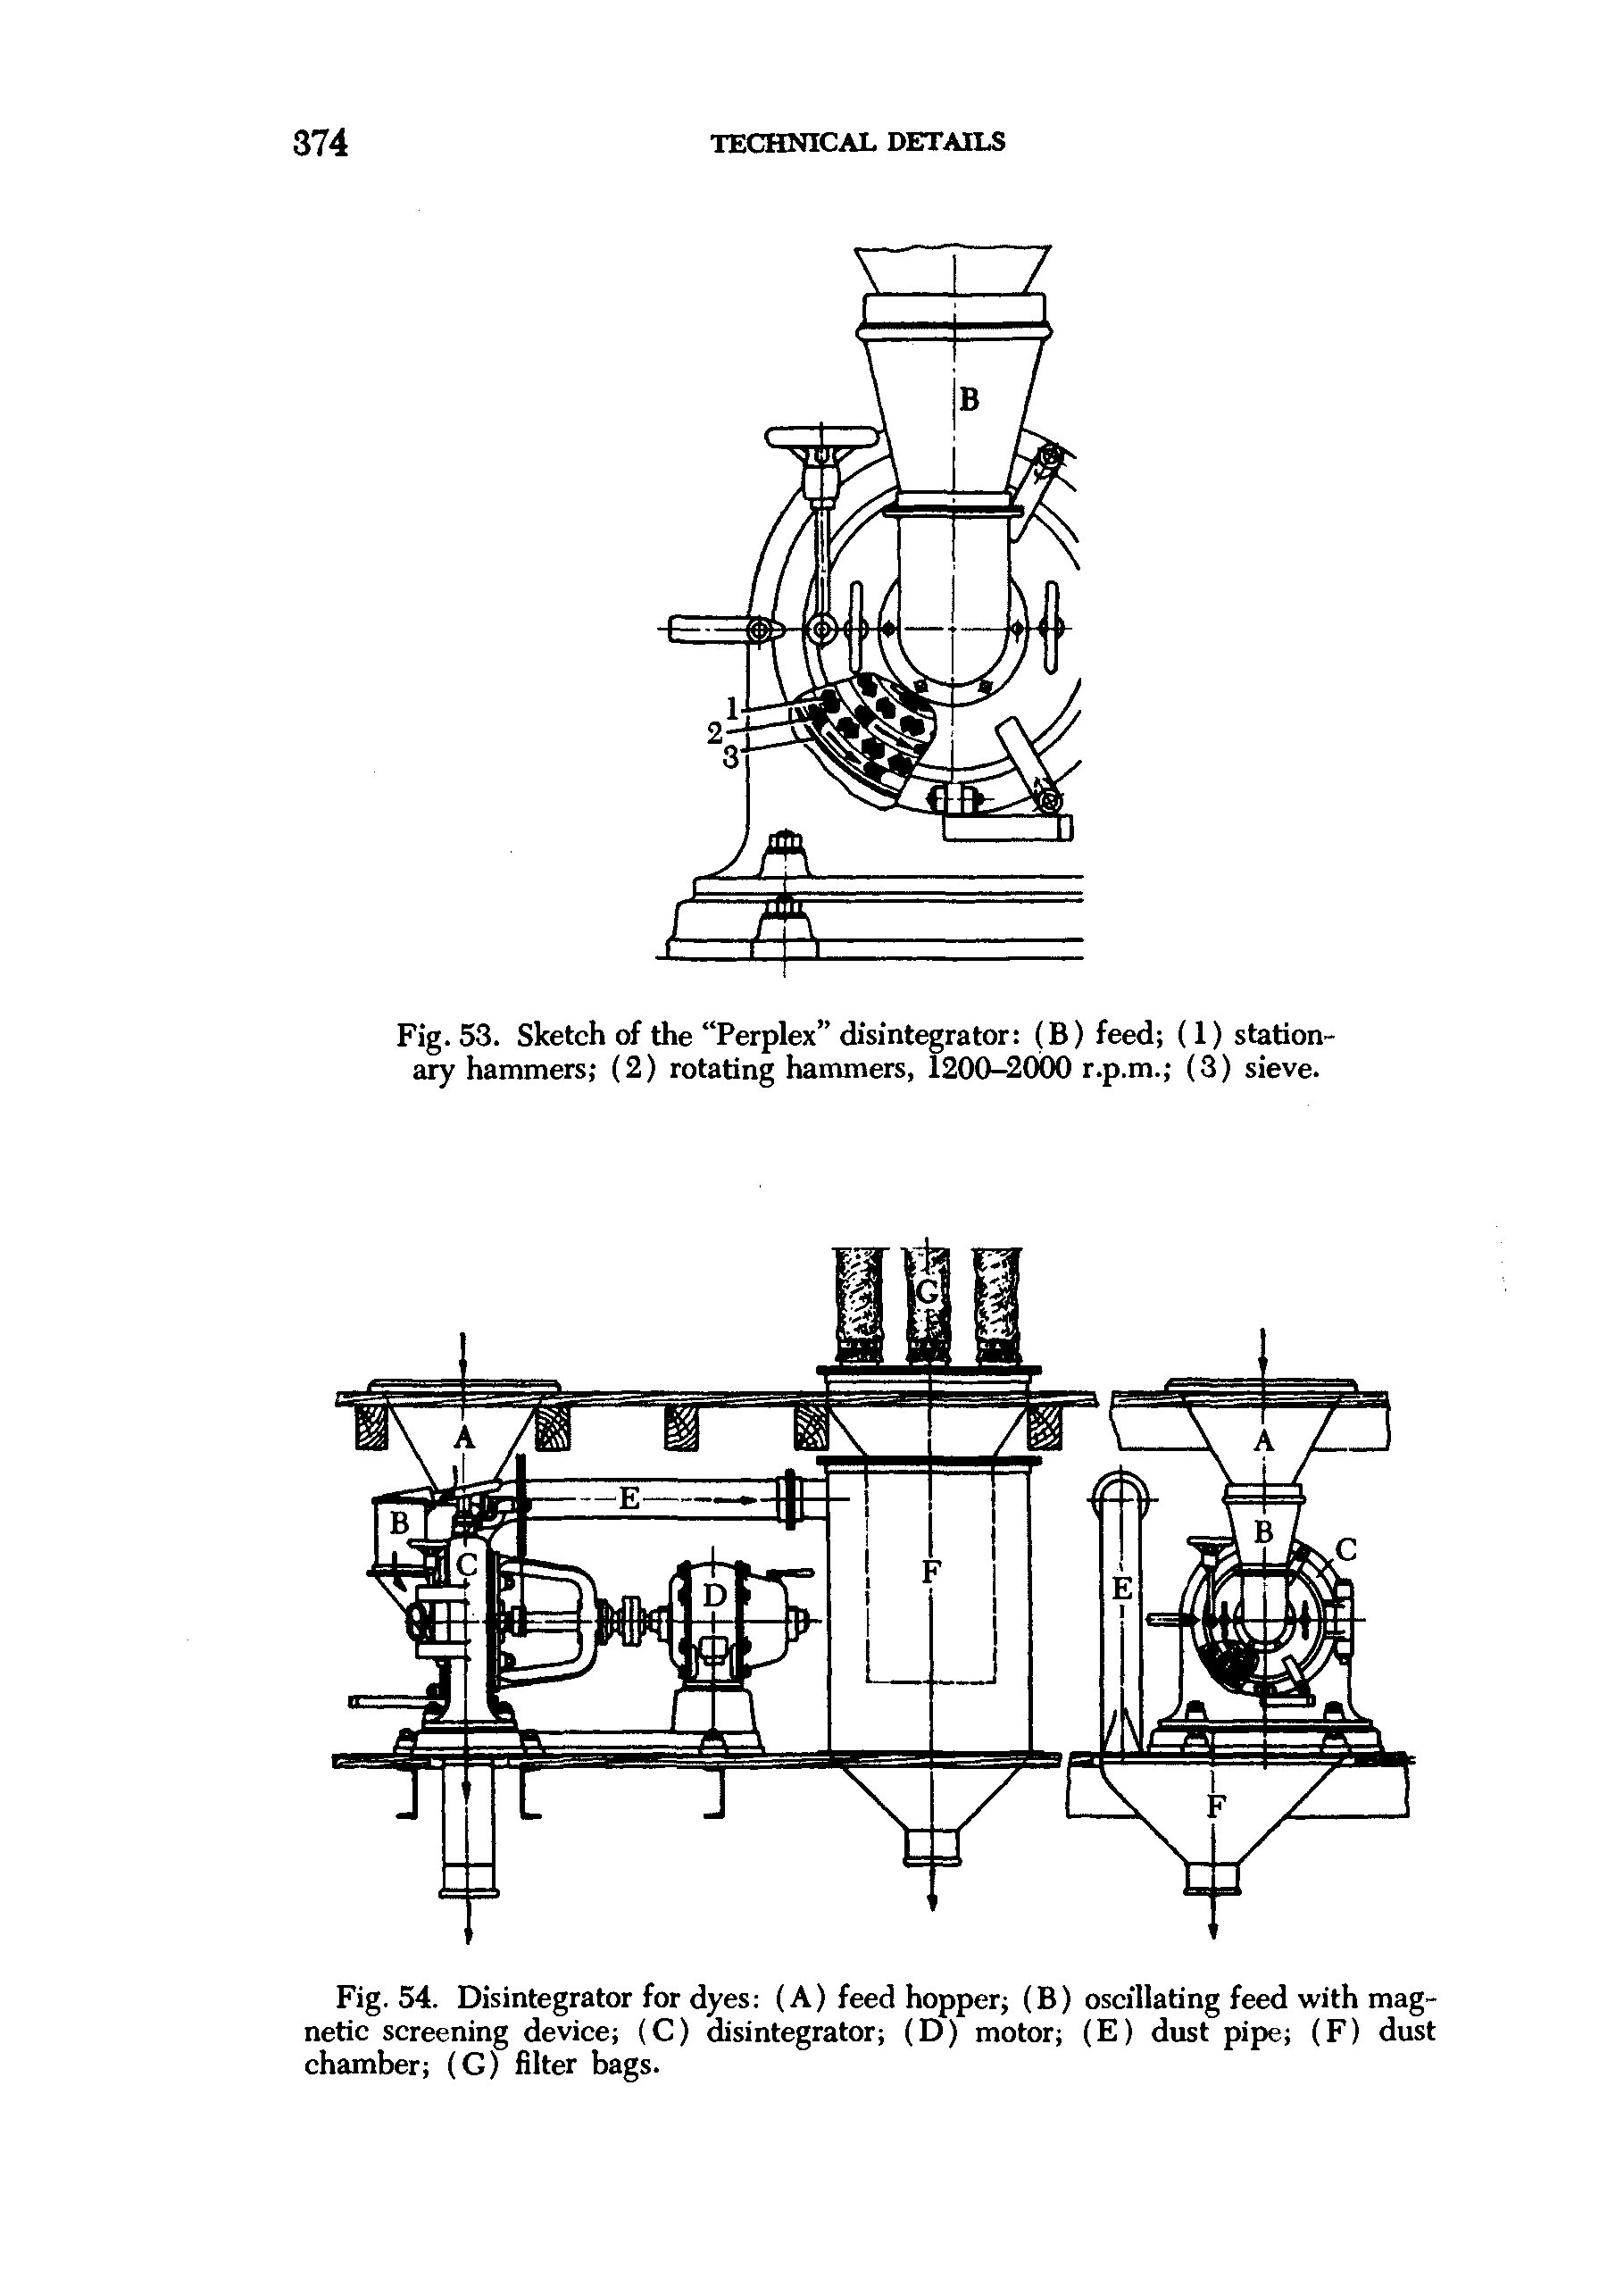 Fig. 54. Disintegrator for dyes (A) feed hopper (B) oscillating feed with magnetic screening device (C) disintegrator (D) motor (E) dust pipe (F) dust chamber (G) filter bags.